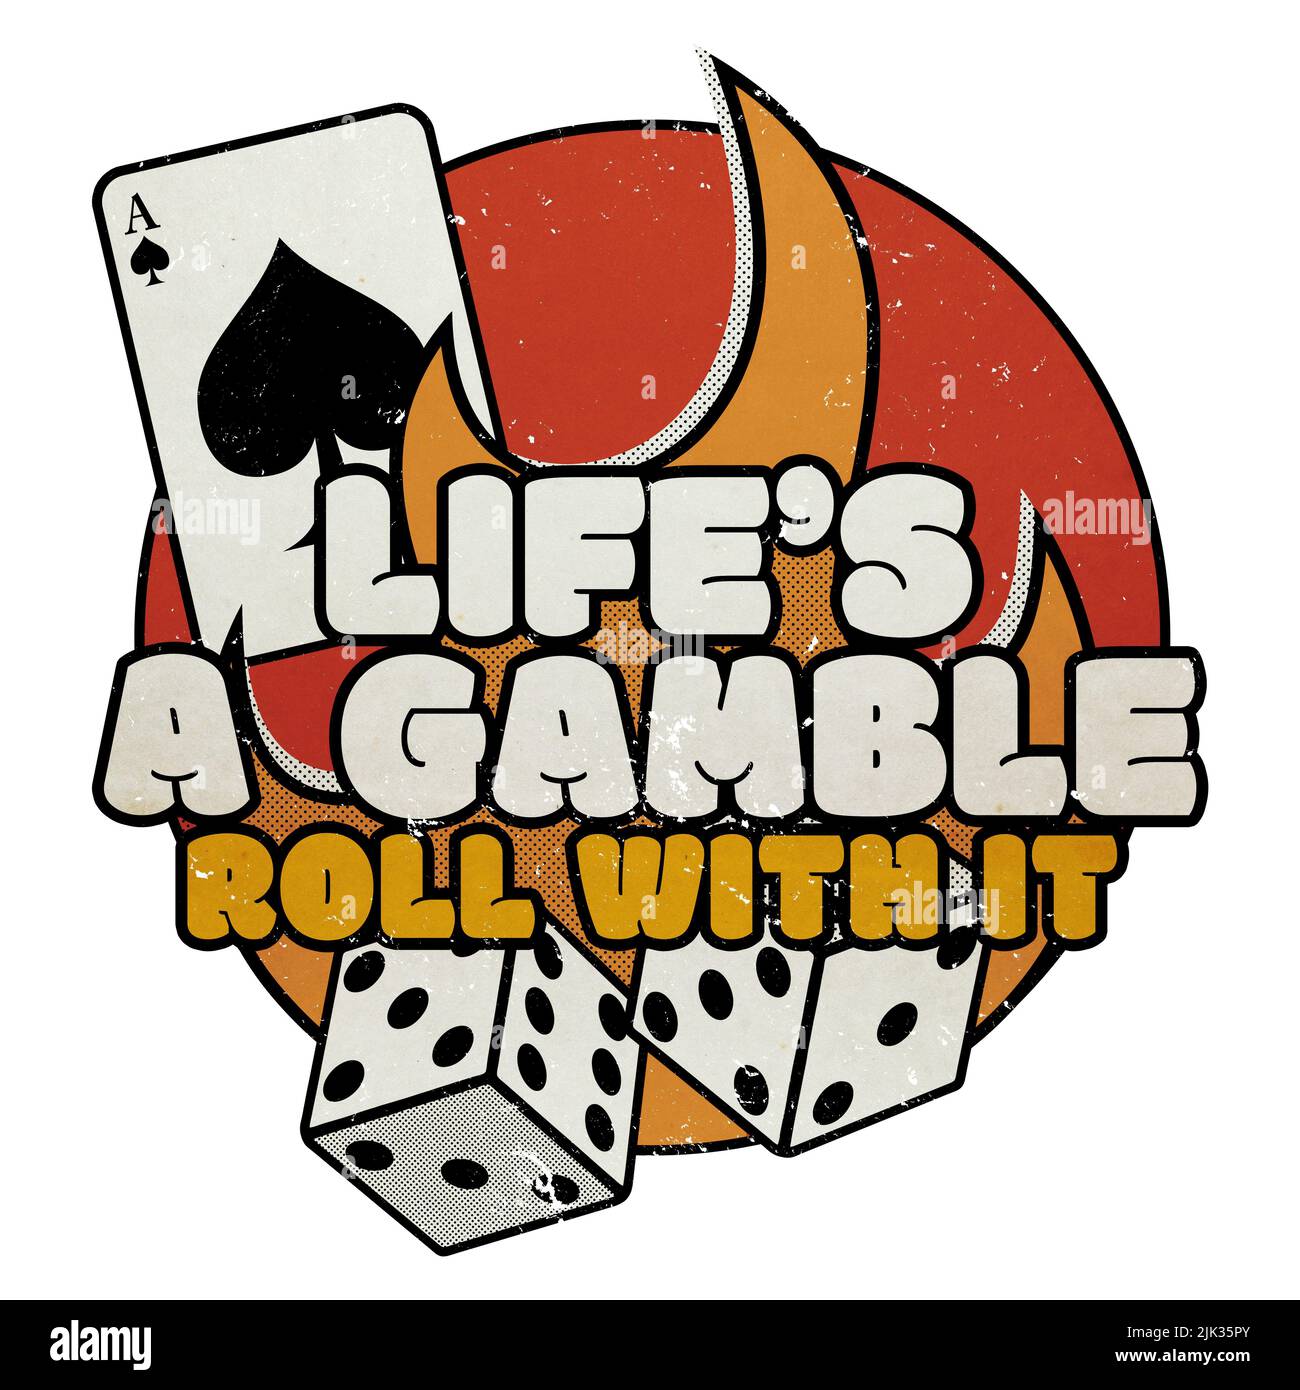 Life's A Gamble - Roll With It - Vintage Casino Gamblers Graphic Stock Photo